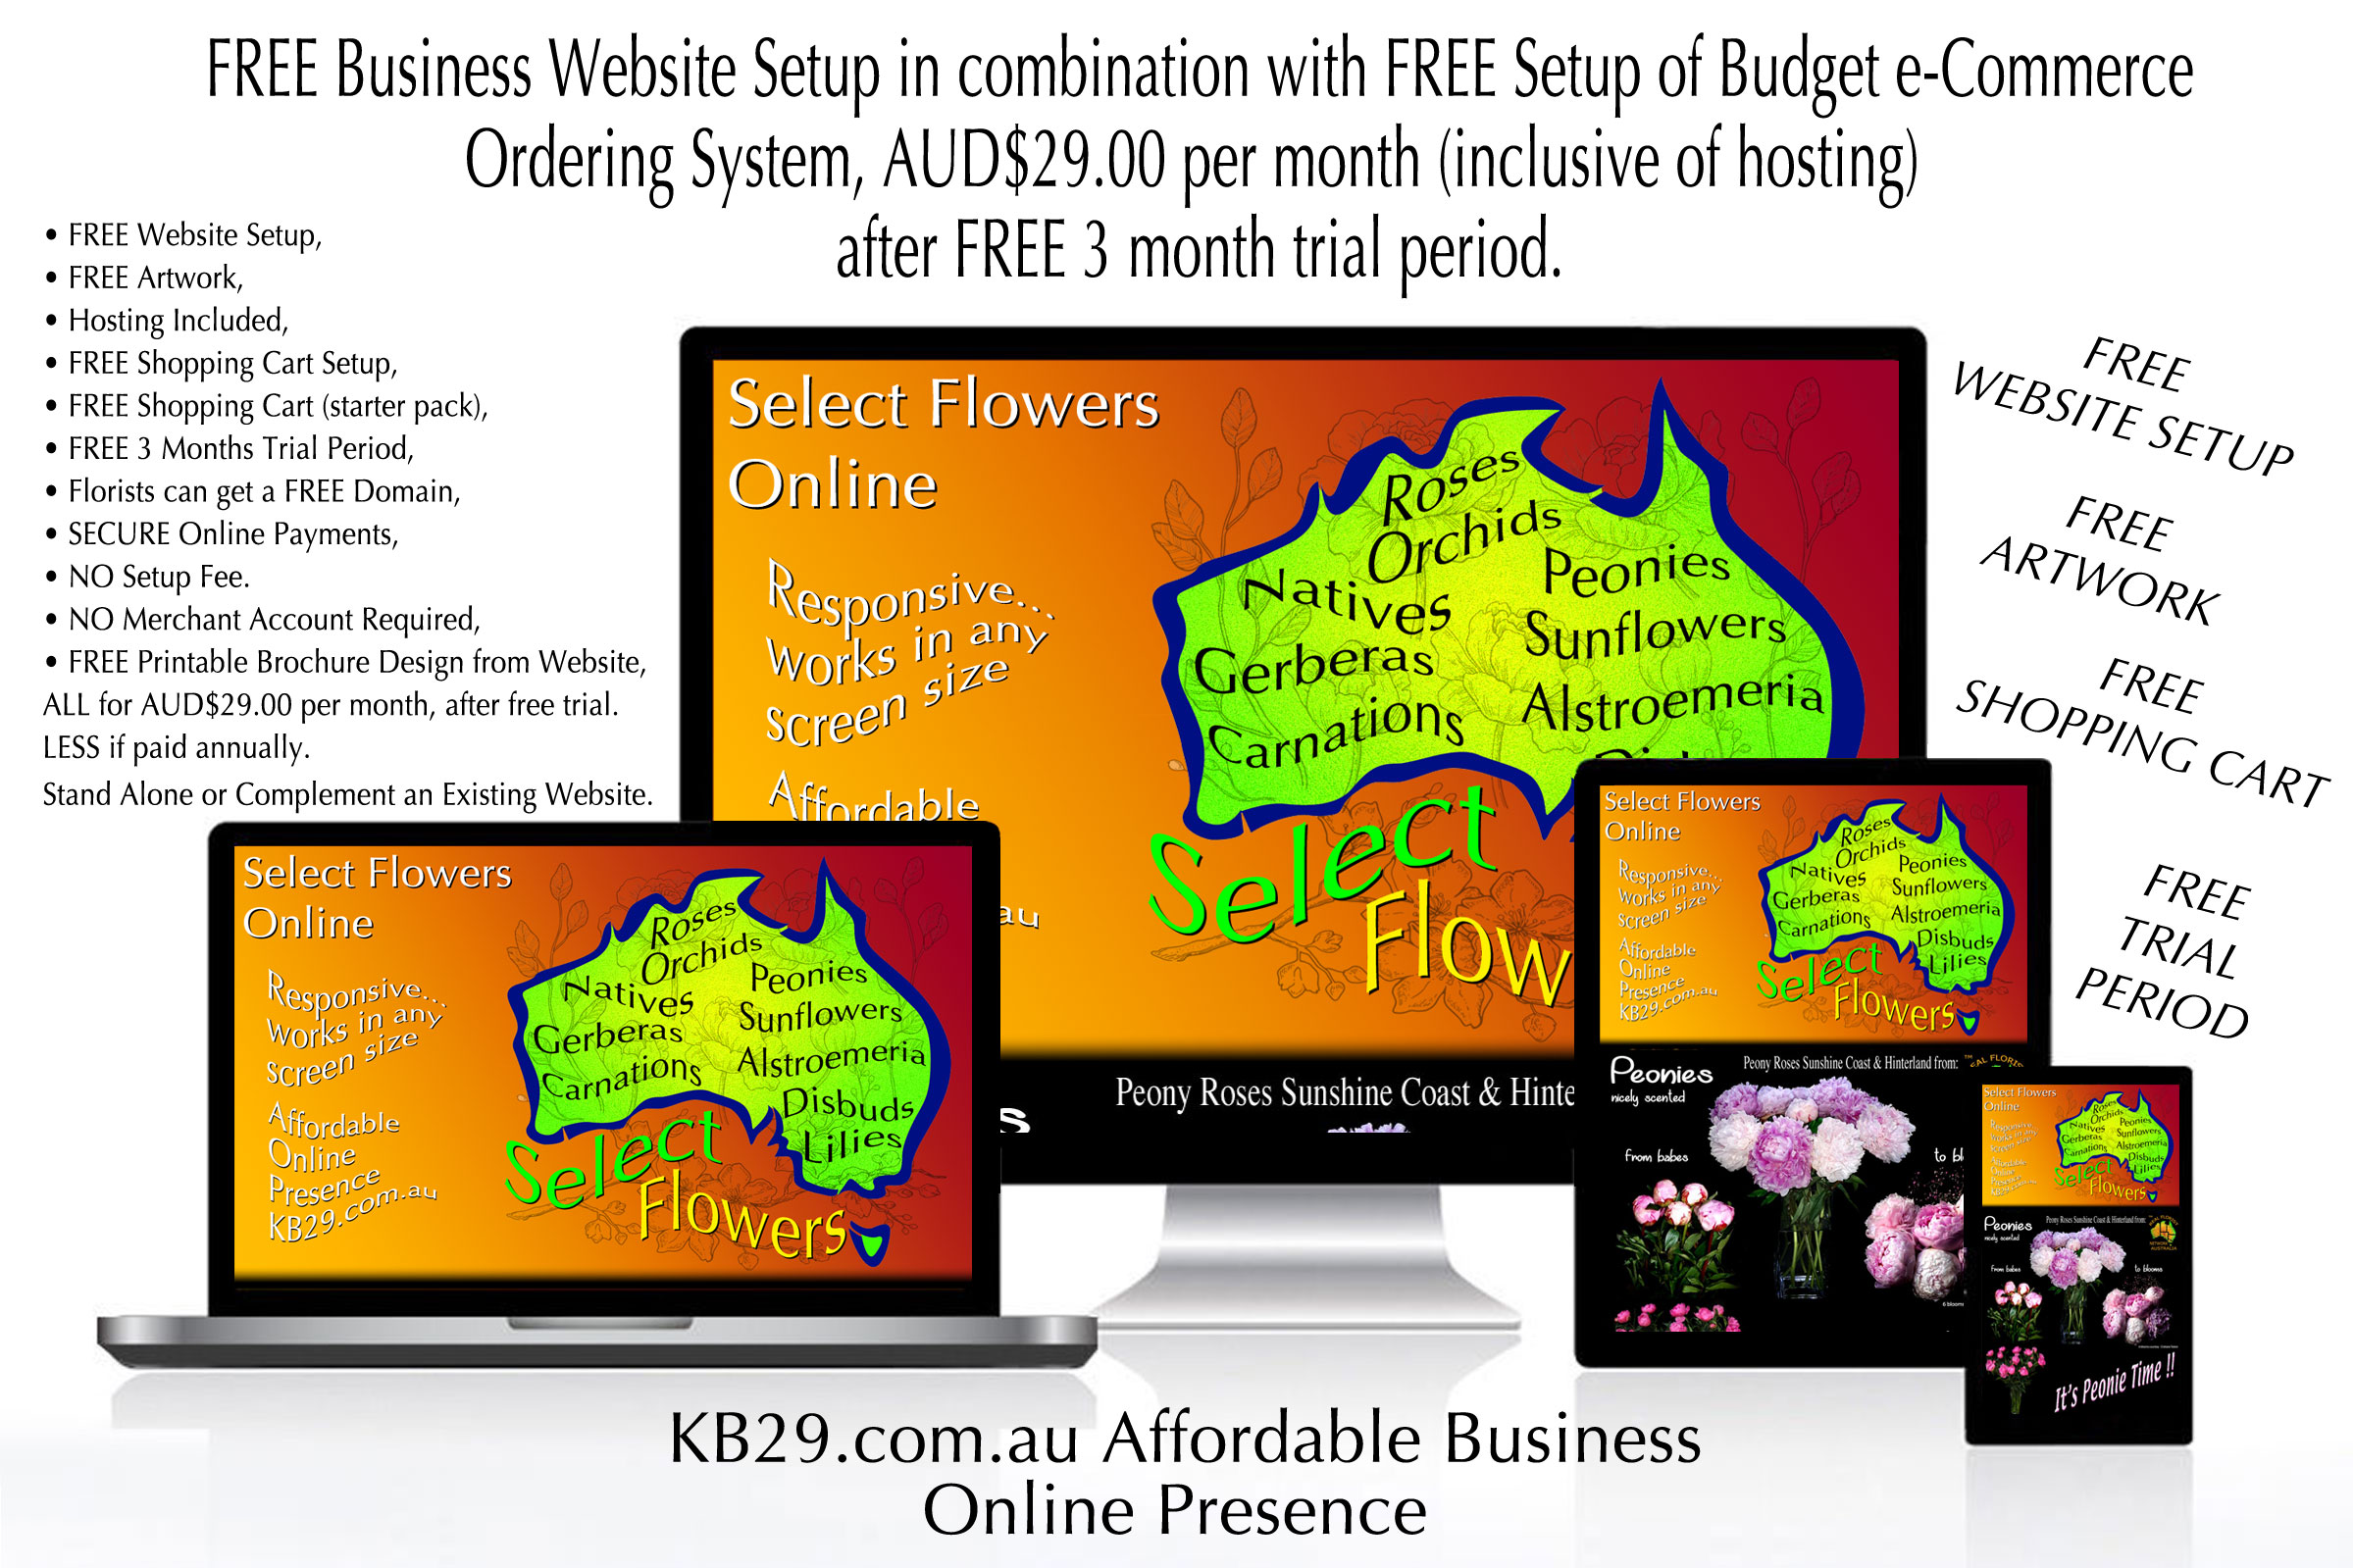 FREE WEBSITE and ONLINE SHOPPING SETUPS with KB29